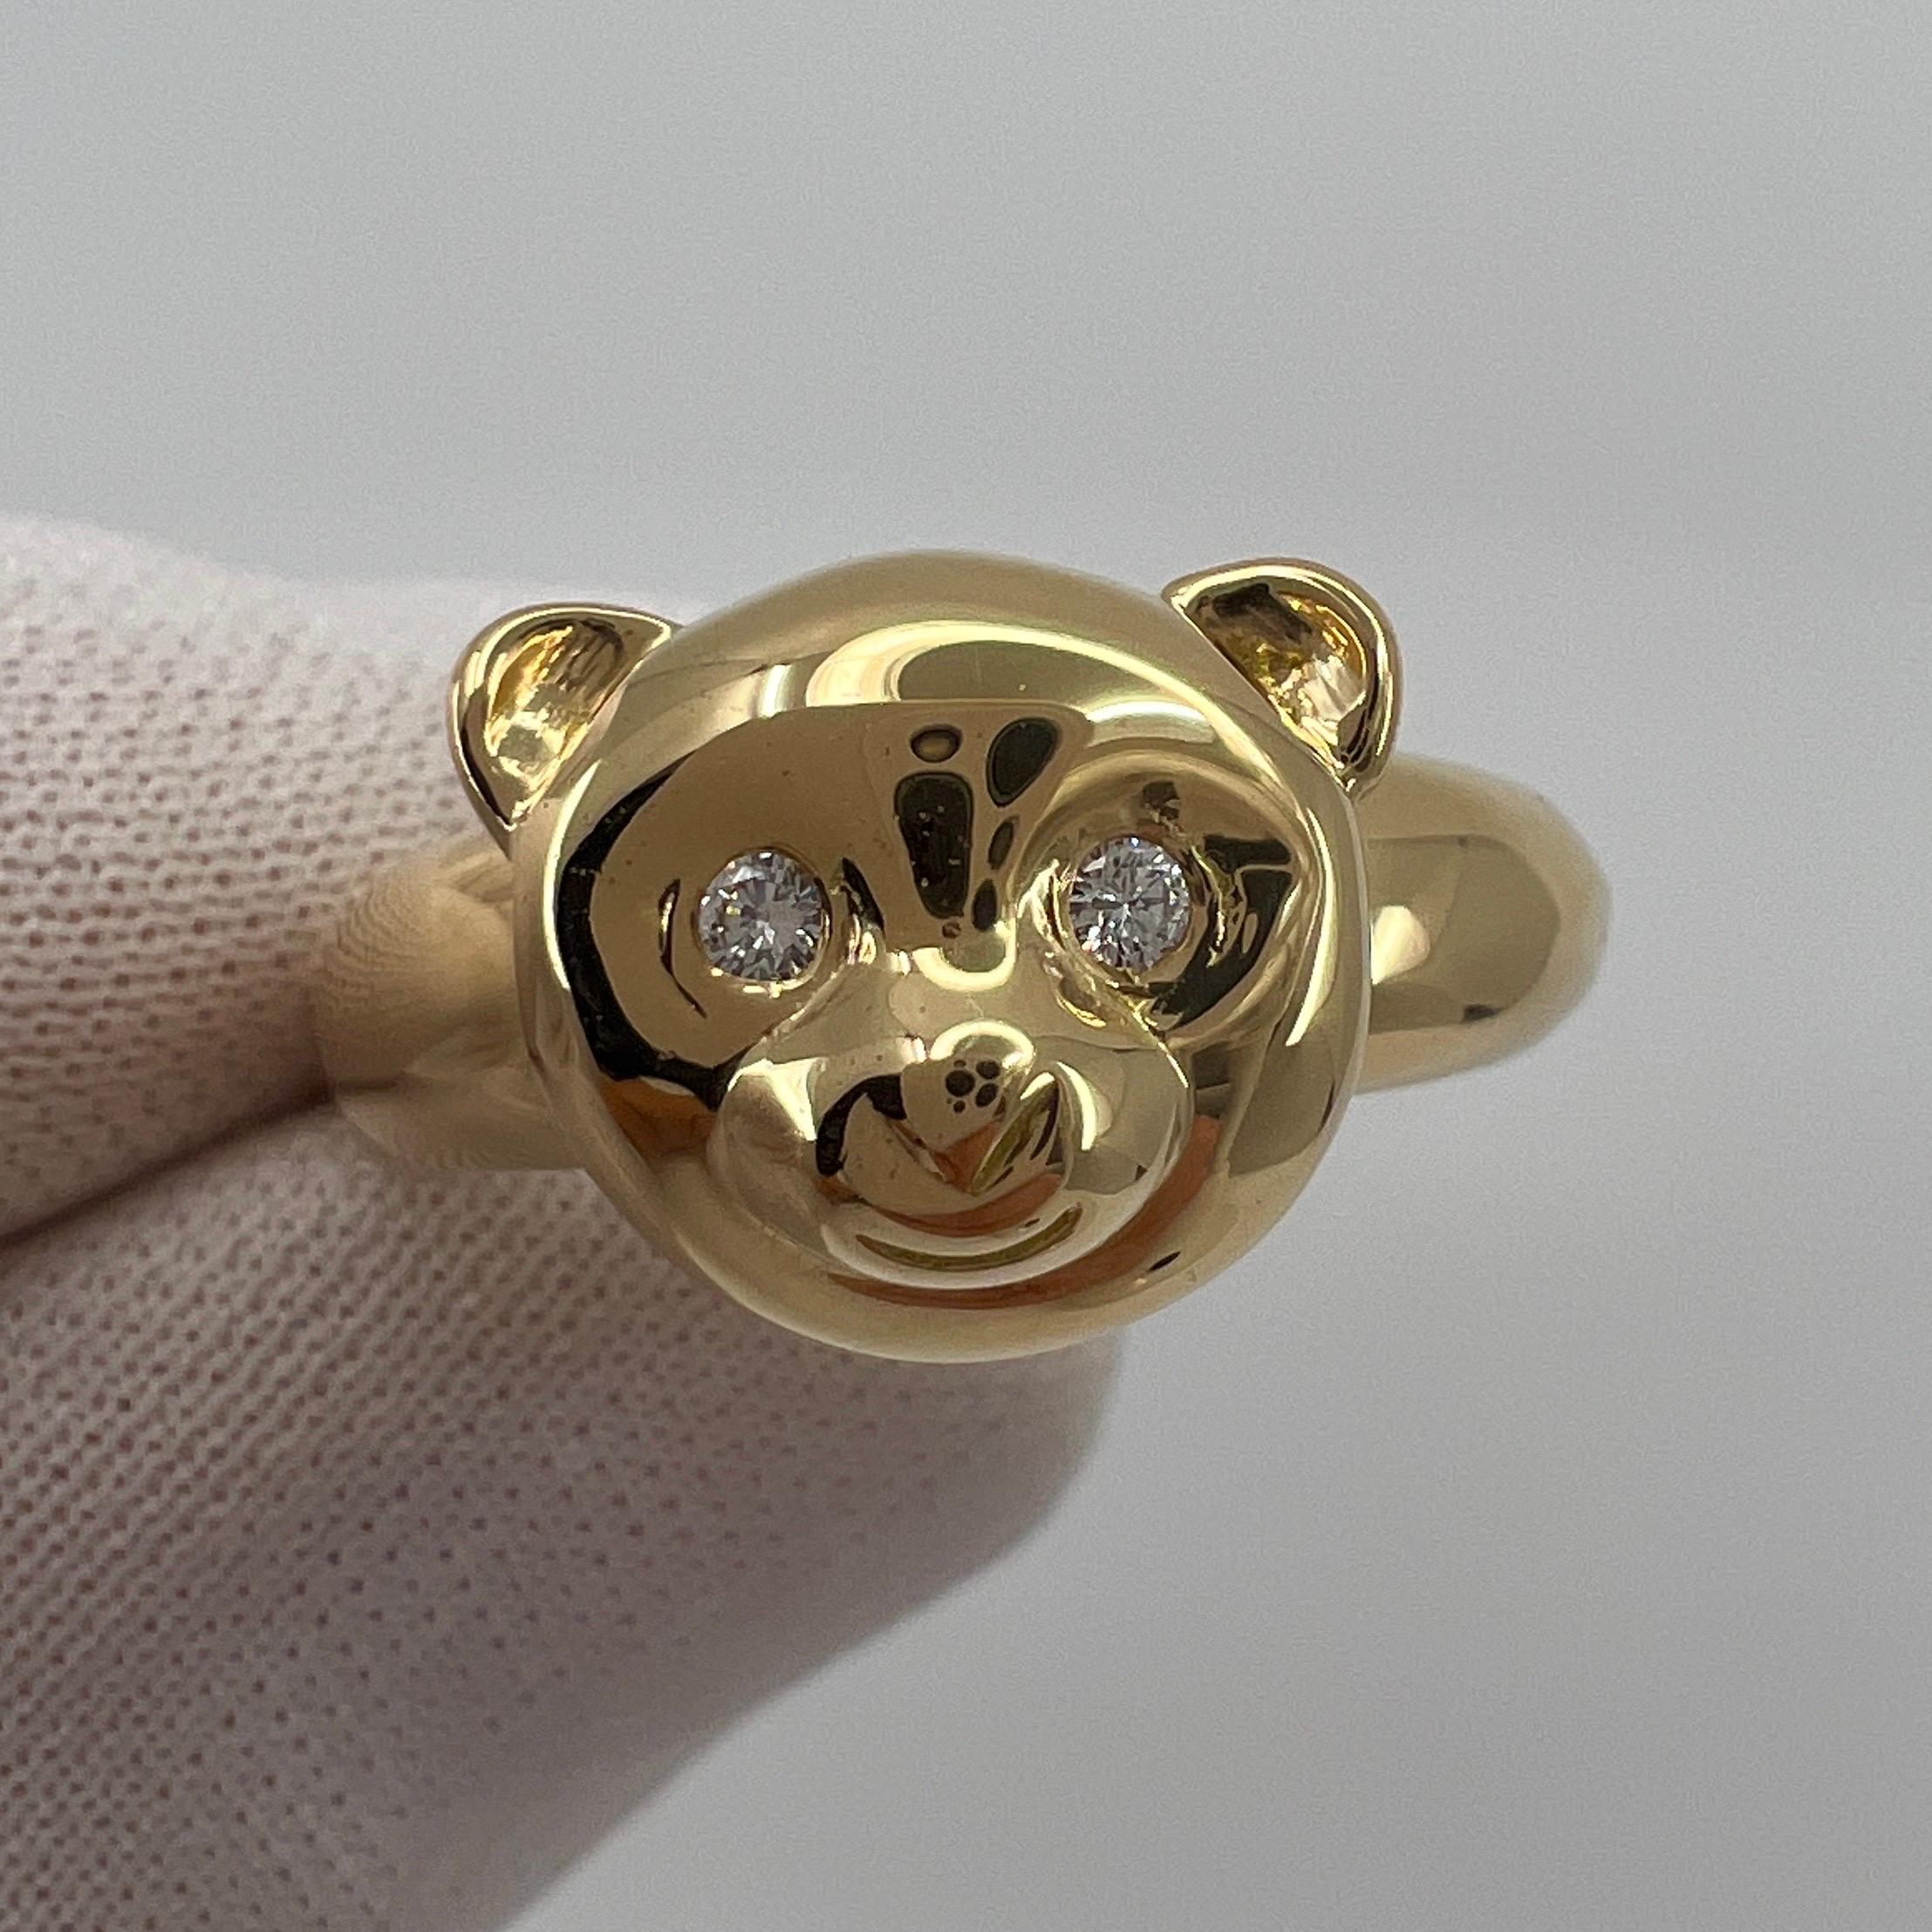 Very Rare Vintage Van Cleef & Arpels 18k Yellow Gold Teddy Bear Ring and Pendant 1